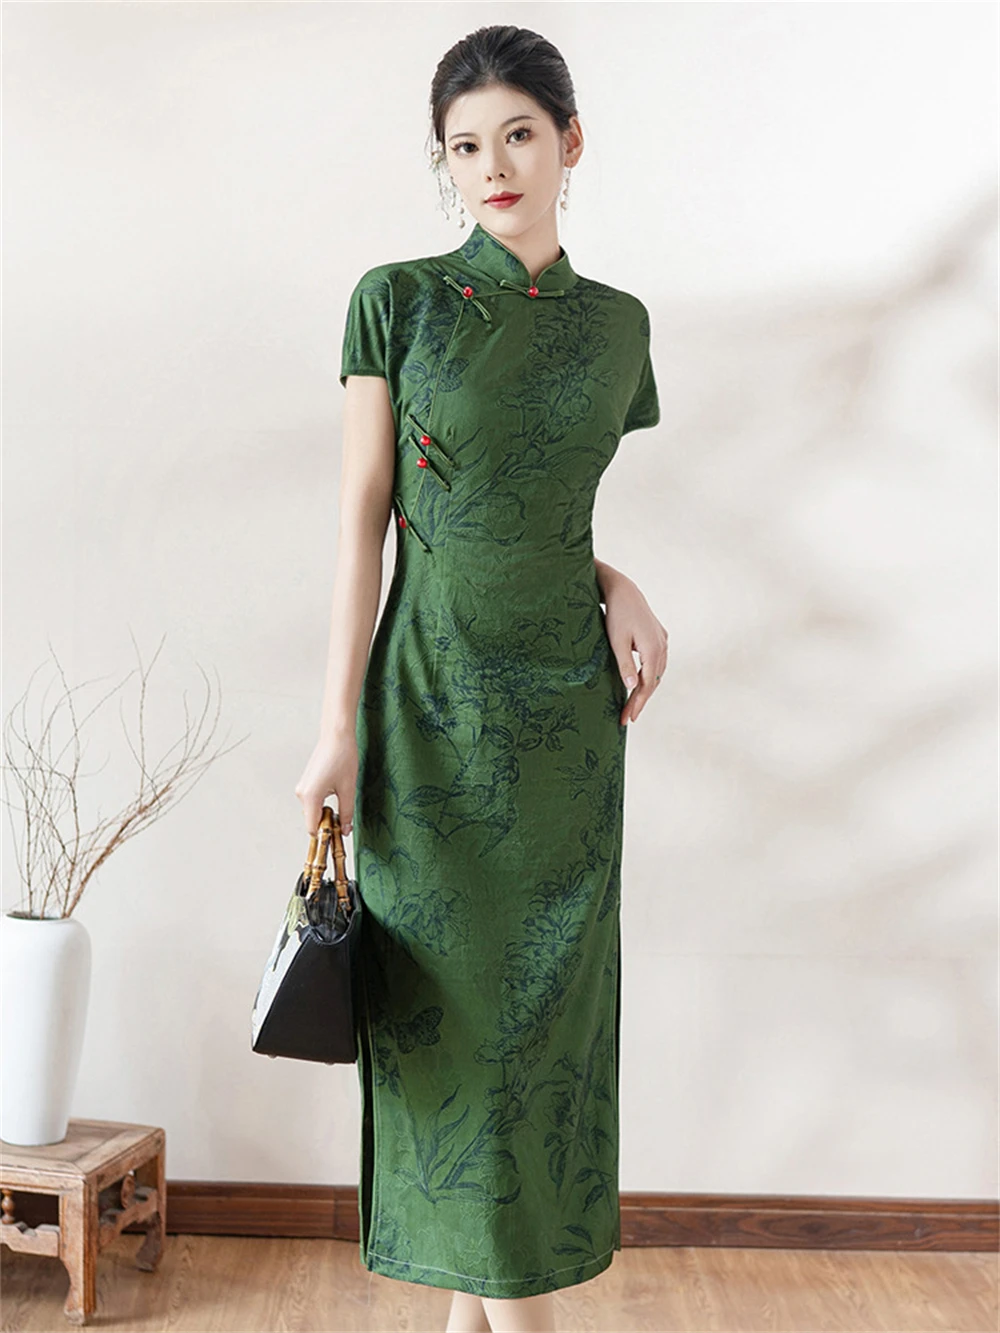 

New Women' s Chinese Traditional Qipao Summer Youth Style Elegant Green Jacquard Improved Short-sleeved Slim Fit Cheongsam Dress